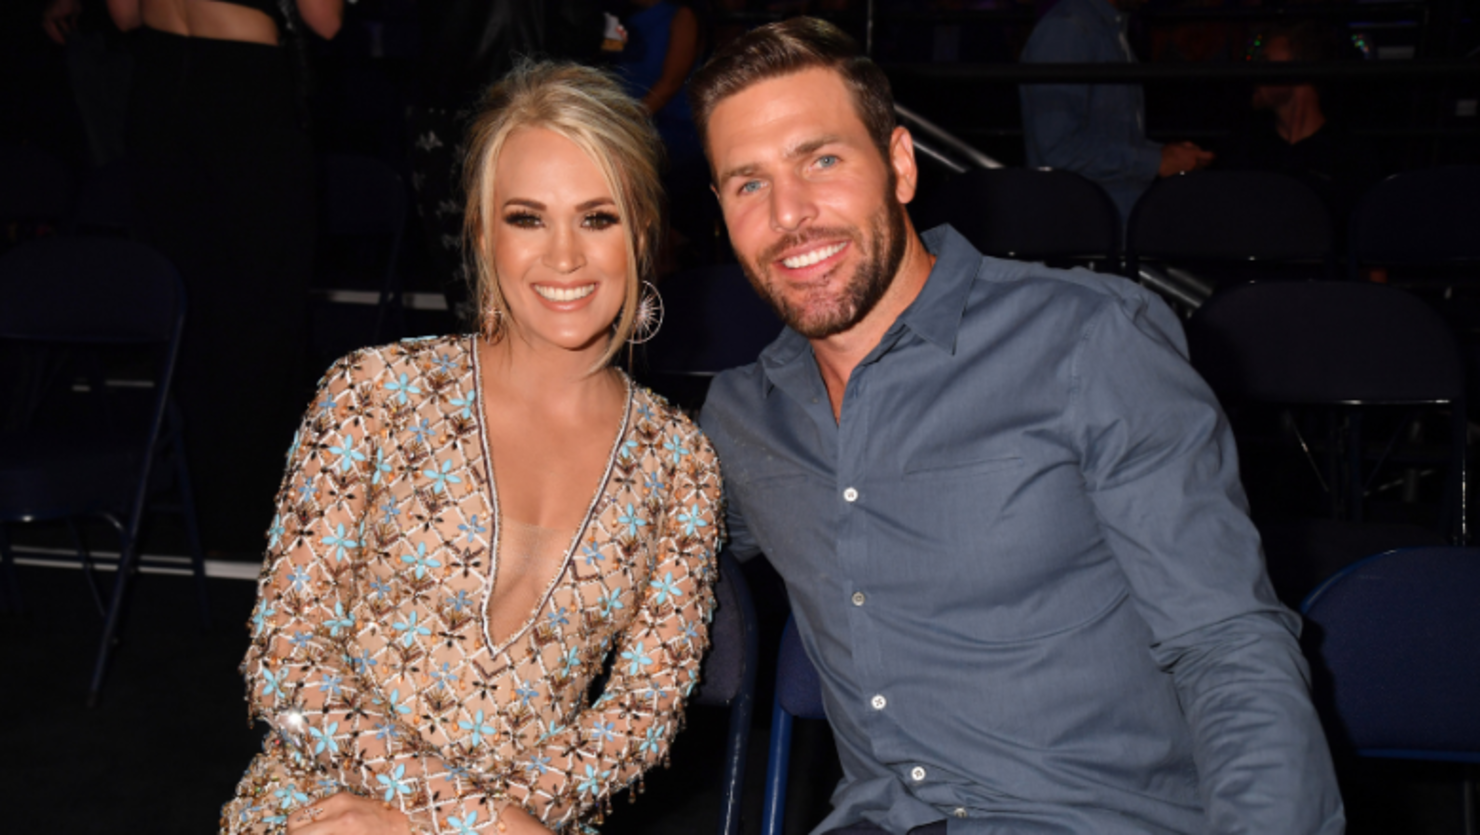 Carrie Underwood's Husband Mike Fisher Bought Her Cows For Christmas 